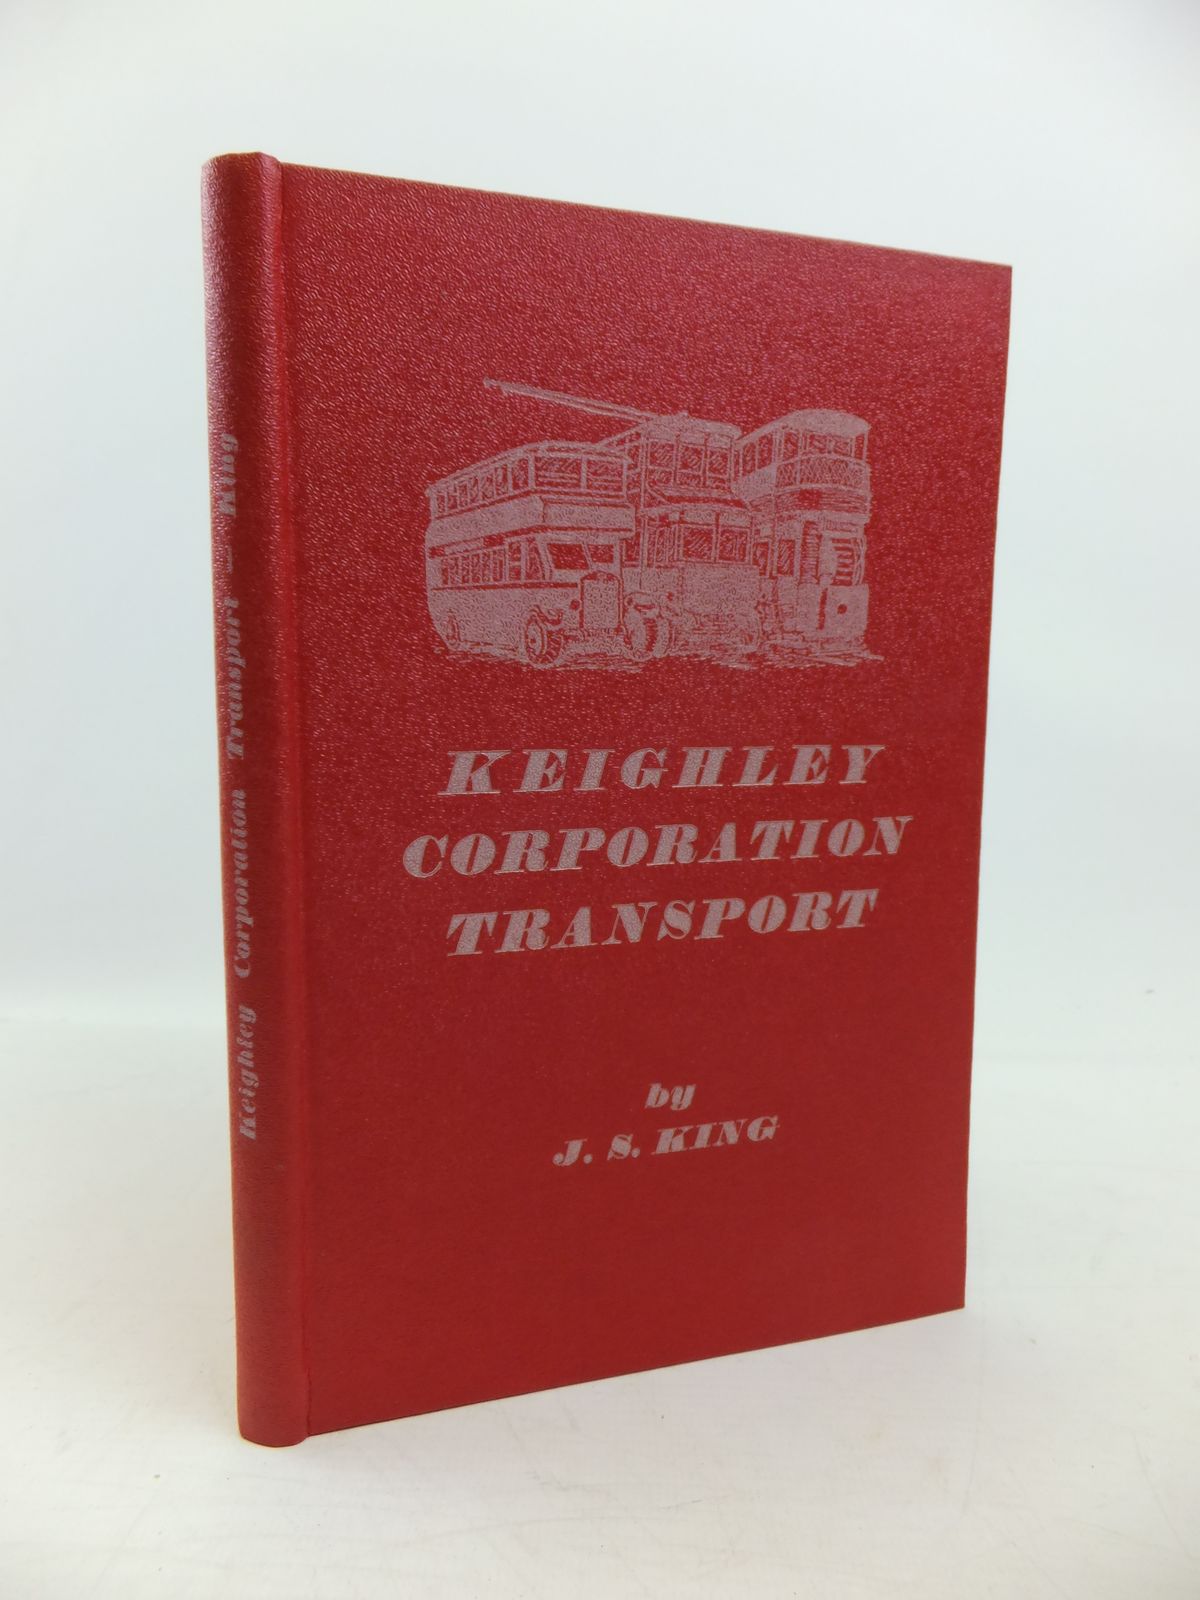 Photo of KEIGHLEY CORPORATION TRANSPORT written by King, J.S. published by The Advertiser Press Ltd. (STOCK CODE: 1208200)  for sale by Stella & Rose's Books